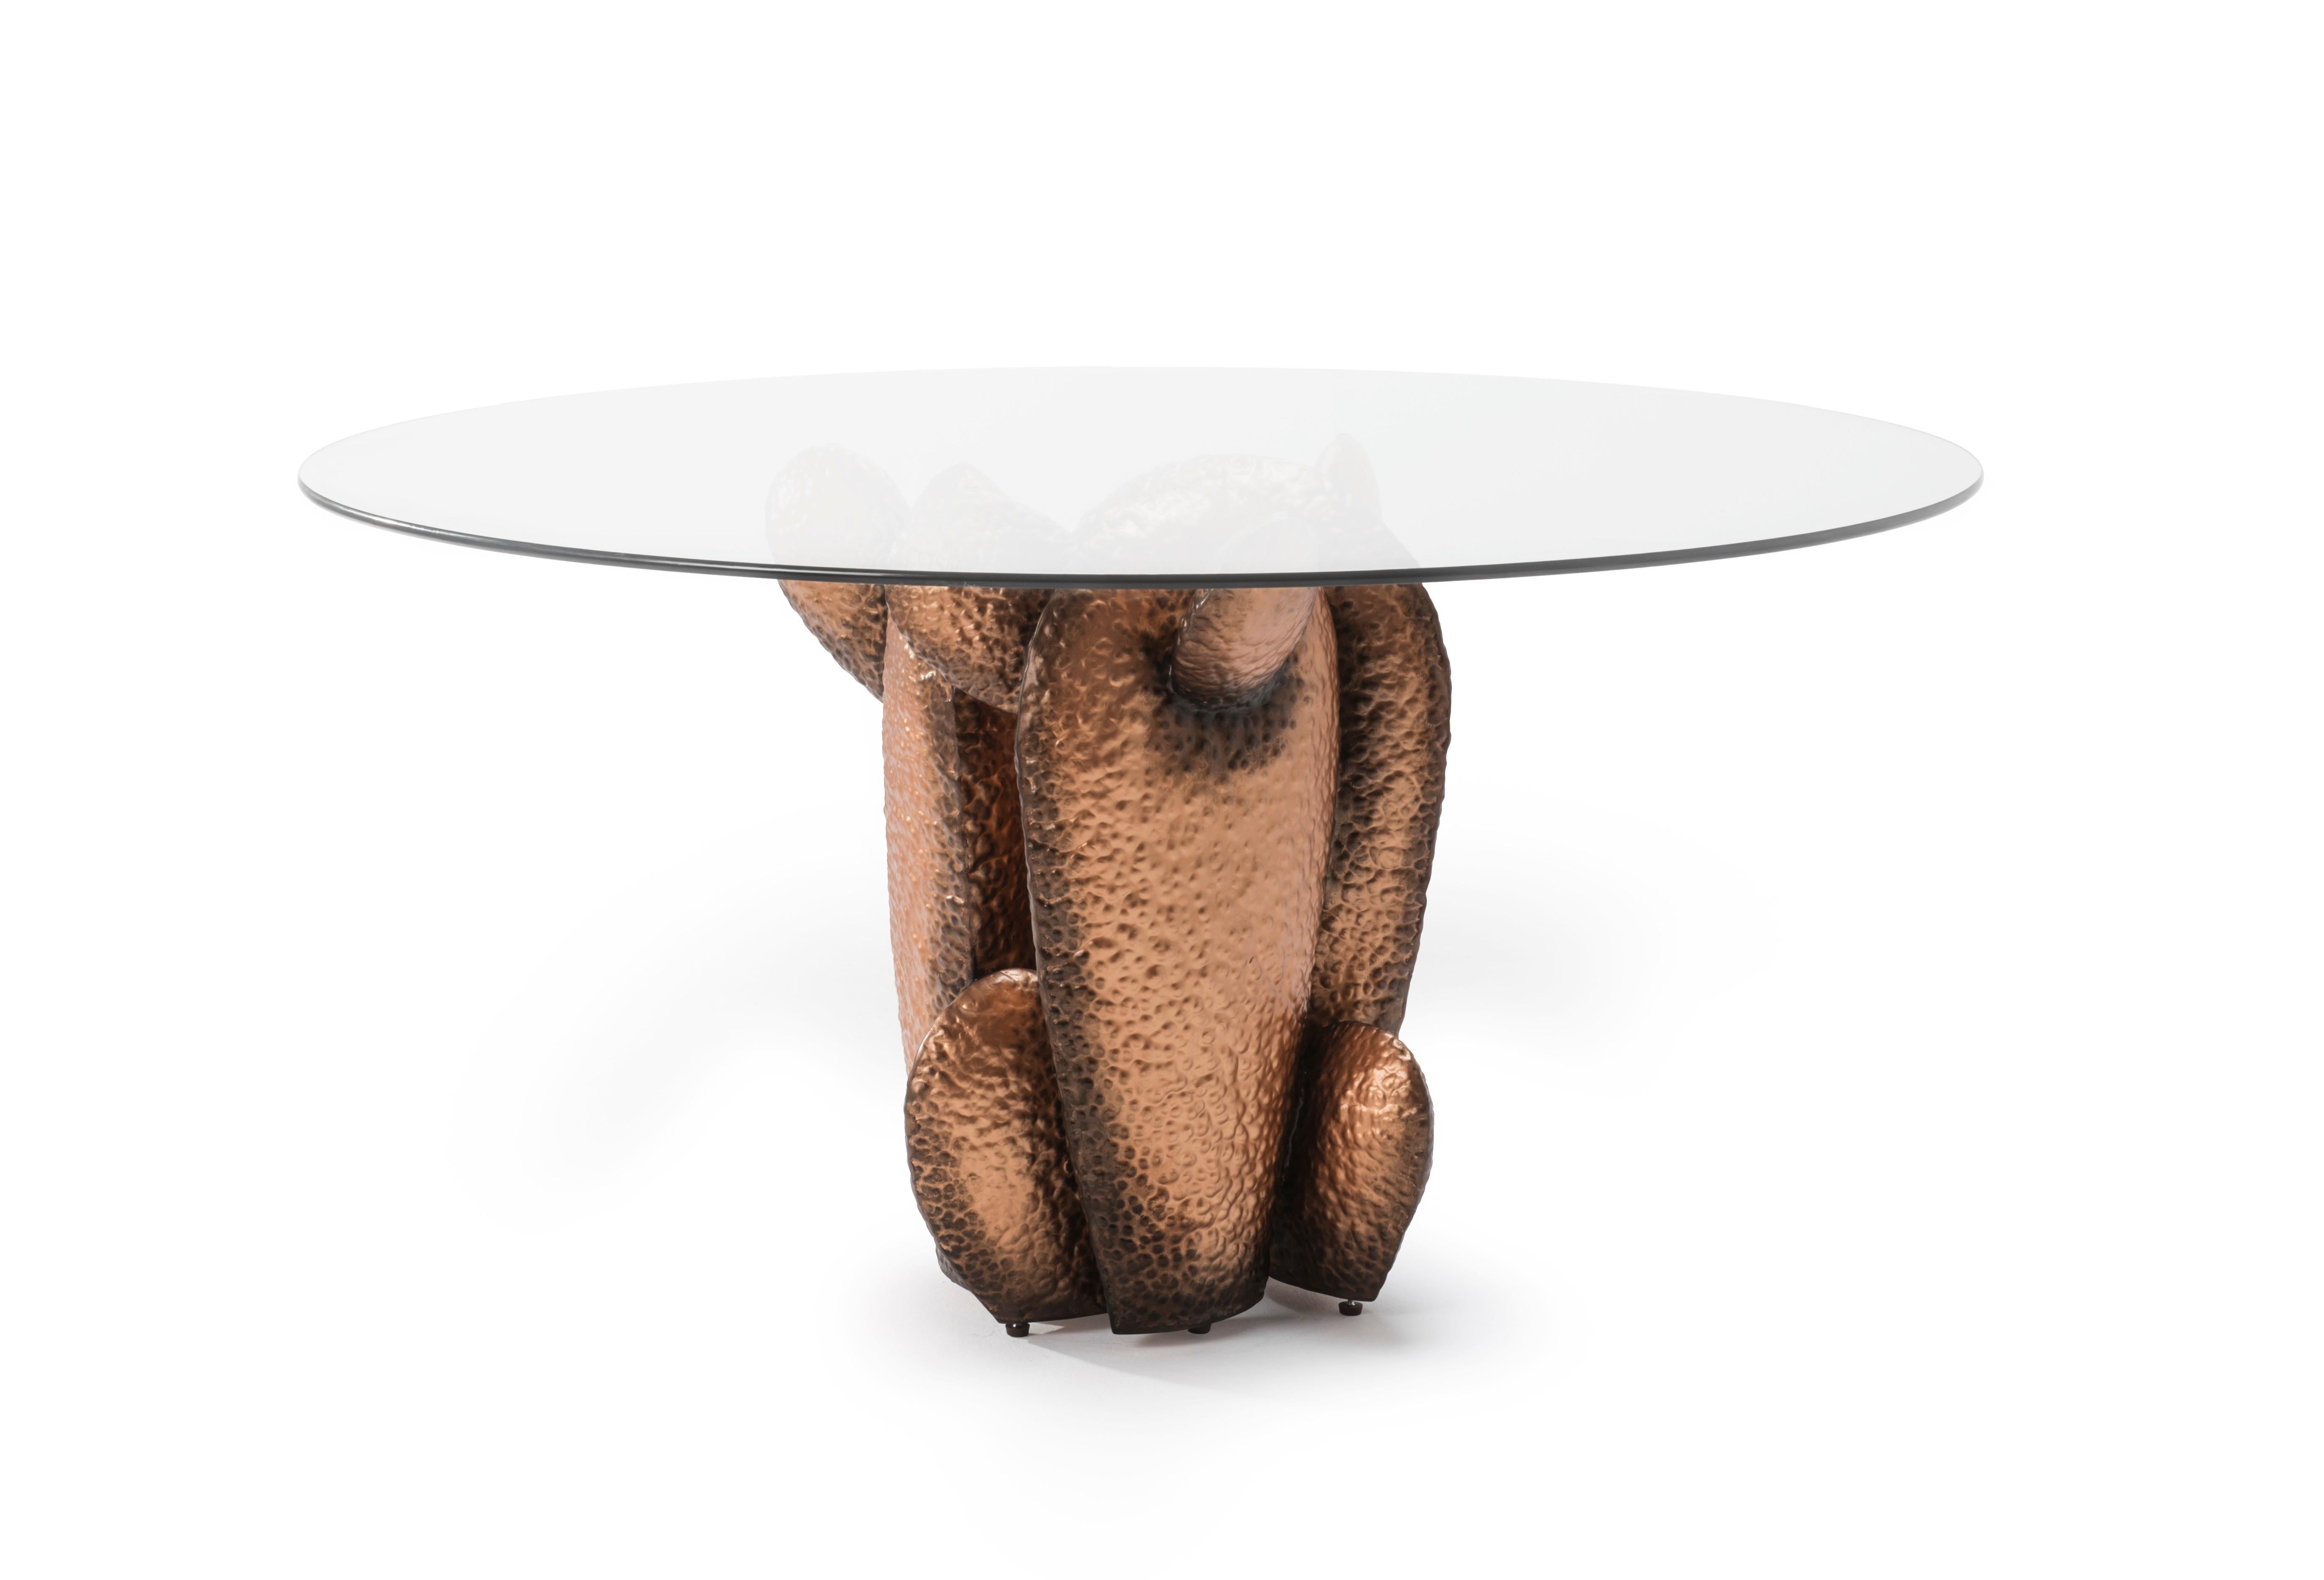 Gobi dining table by Kenneth Cobonpue
Materials: Steel, Glass. 
Dimensions: 
Glass diameter 150 cm x height 19mm 
Base 60 cm x 58.5 cm x height 75 cm

Inspired by the characteristic form of the cactus, Gobi is a striking set of tables with its